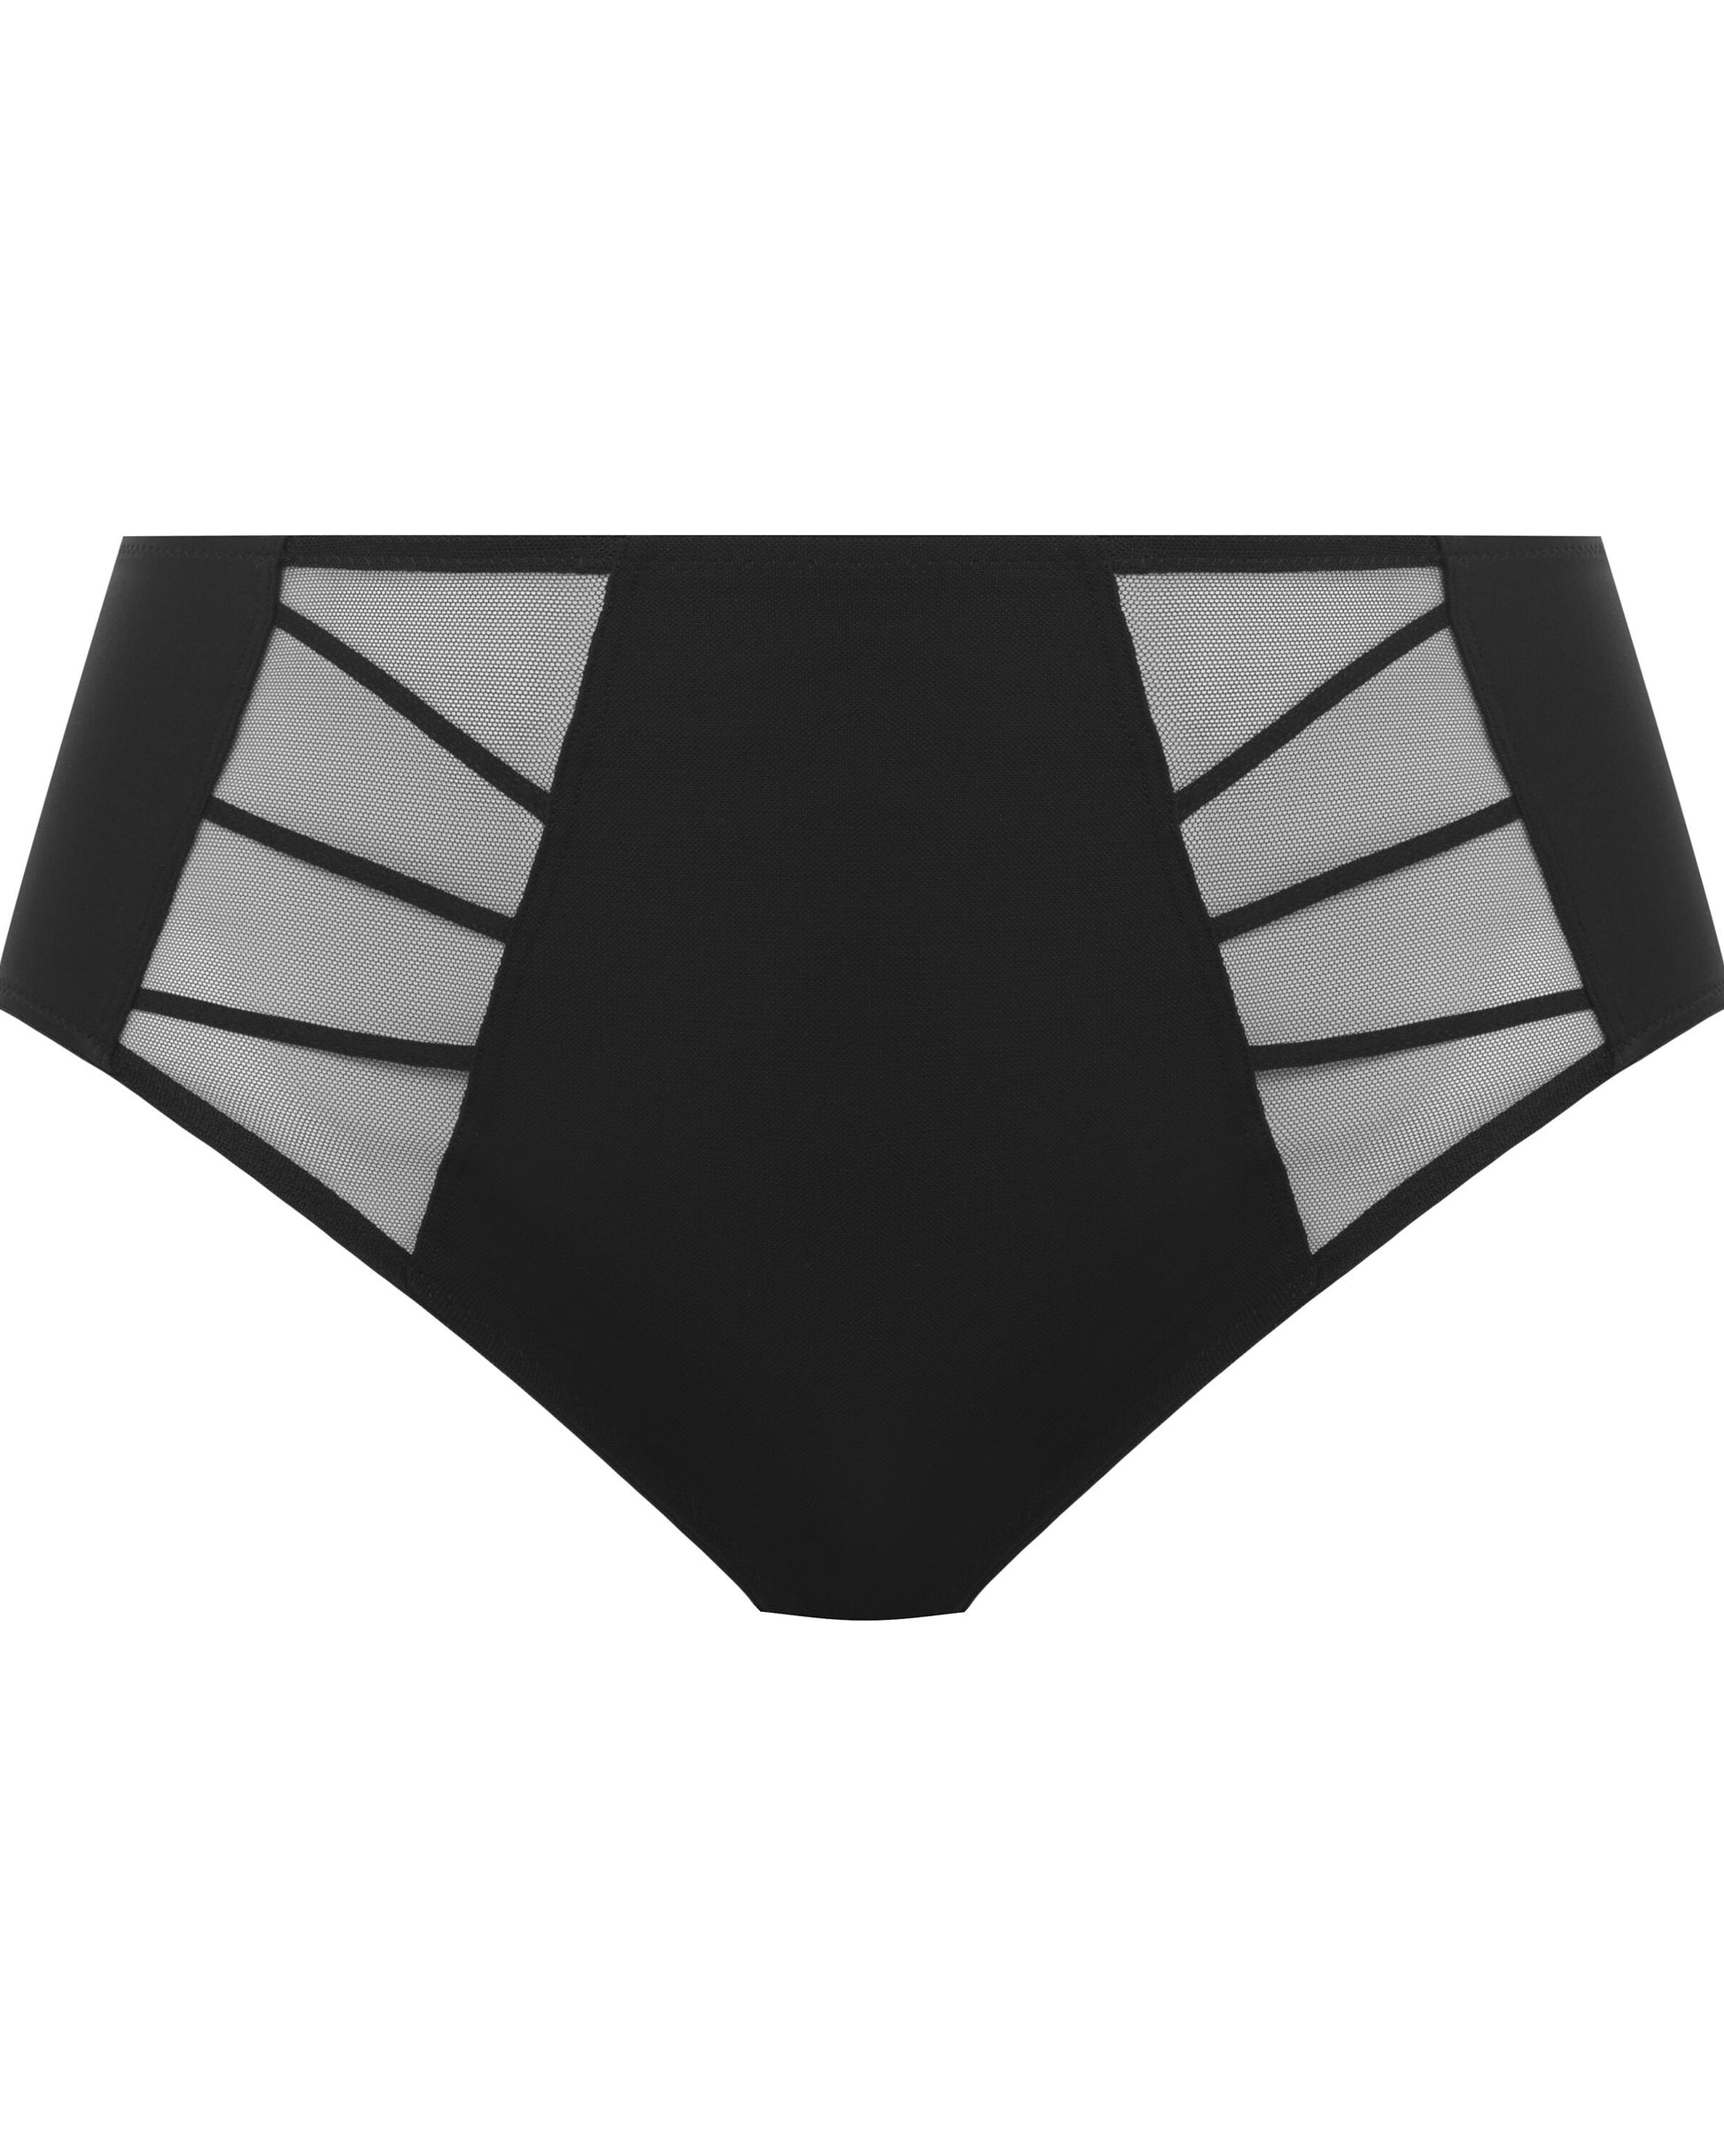 Flat lay of a high waist full brief panty with mesh inserts in black